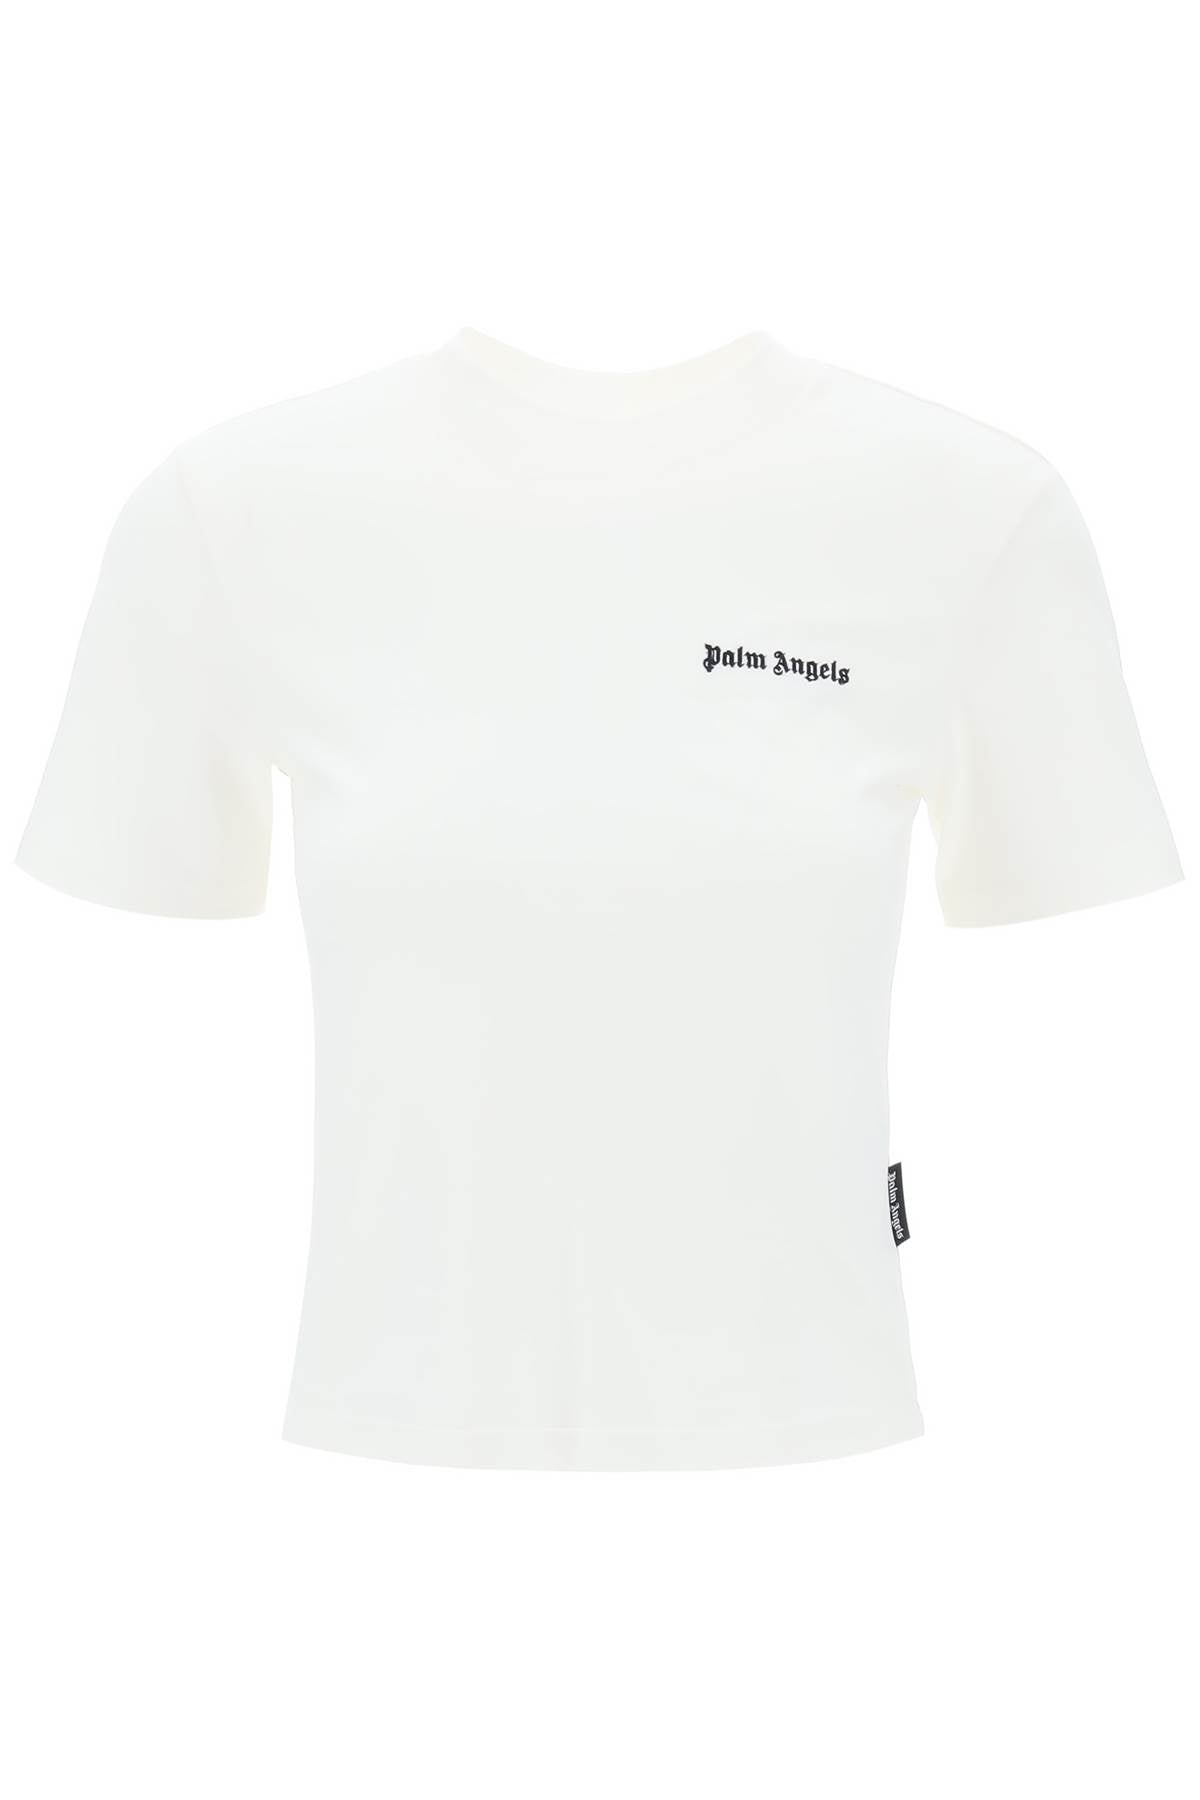 Palm angels "round-neck t-shirt with embroidered-0